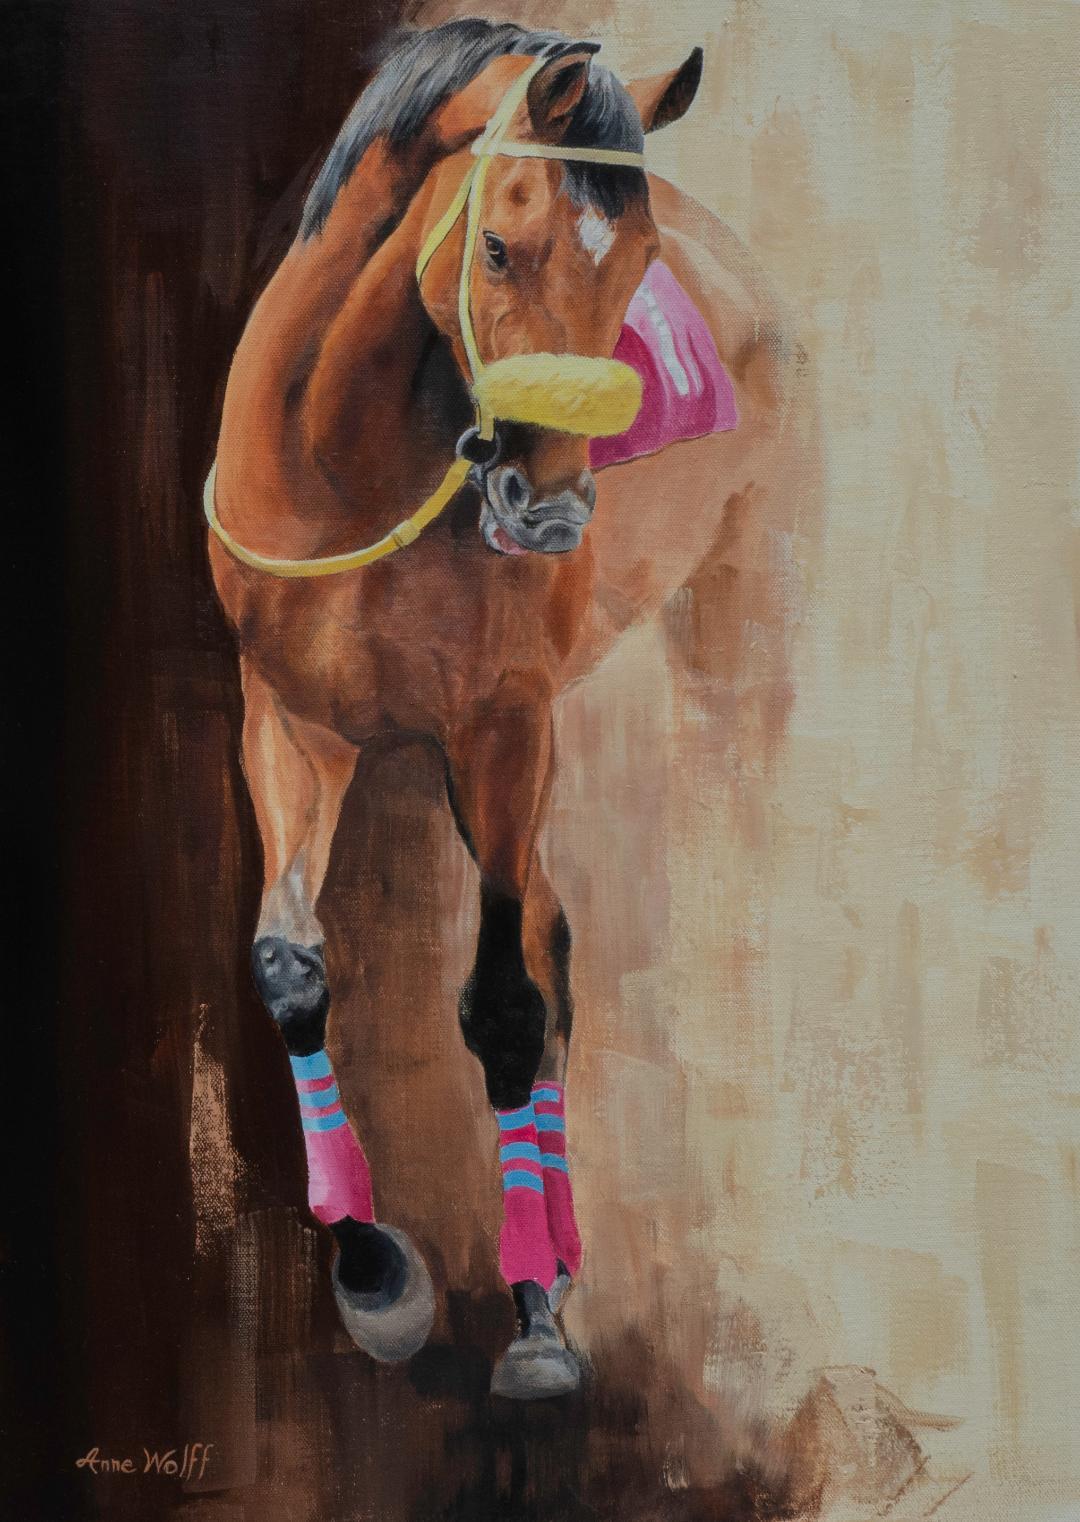 Anne Wolff, "In the Sunlight", Racing Equine Oil Painting on Canvas